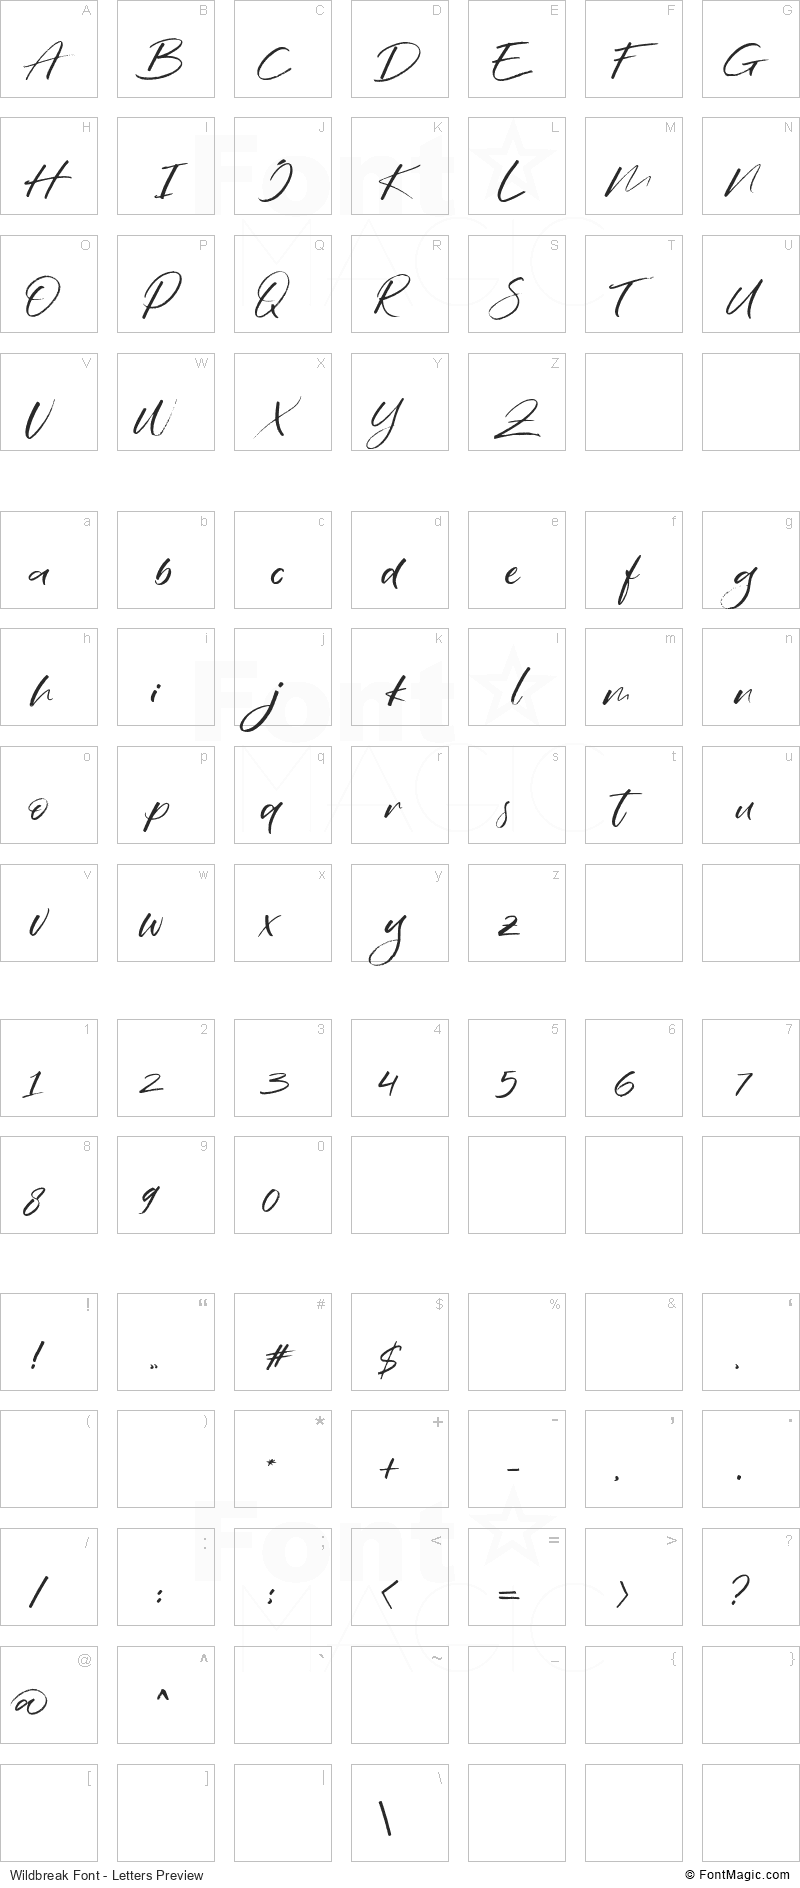 Wildbreak Font - All Latters Preview Chart